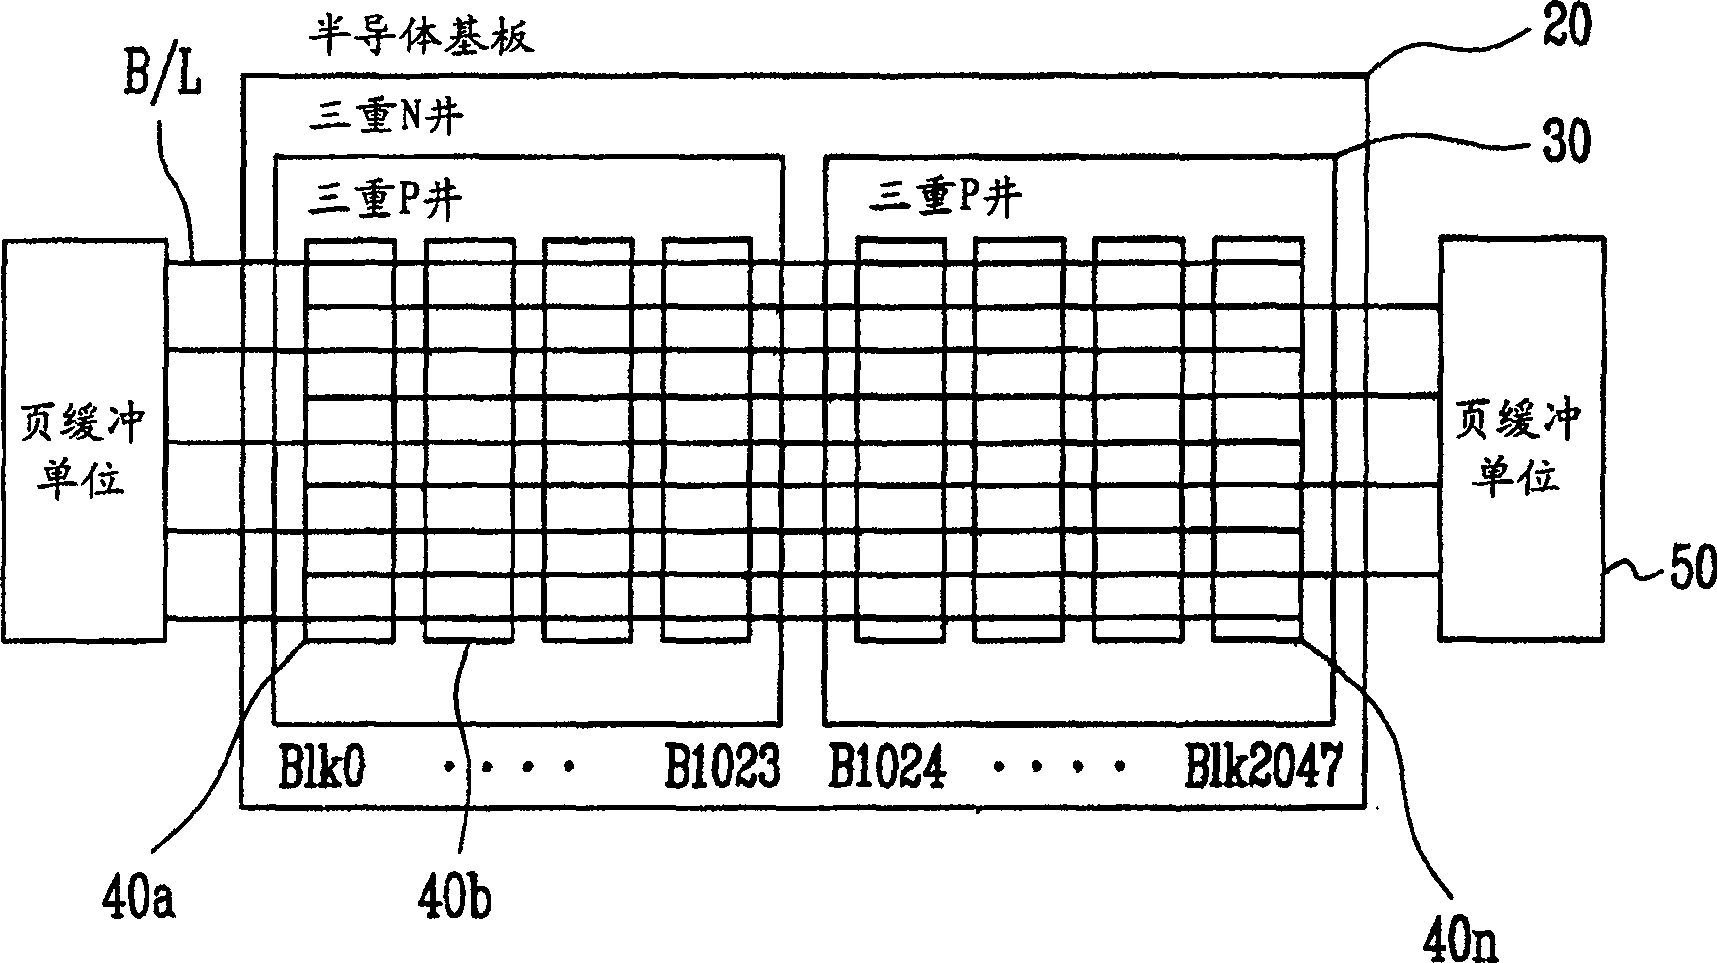 Nand flash memory device and method of forming a well of a nand flash memory device